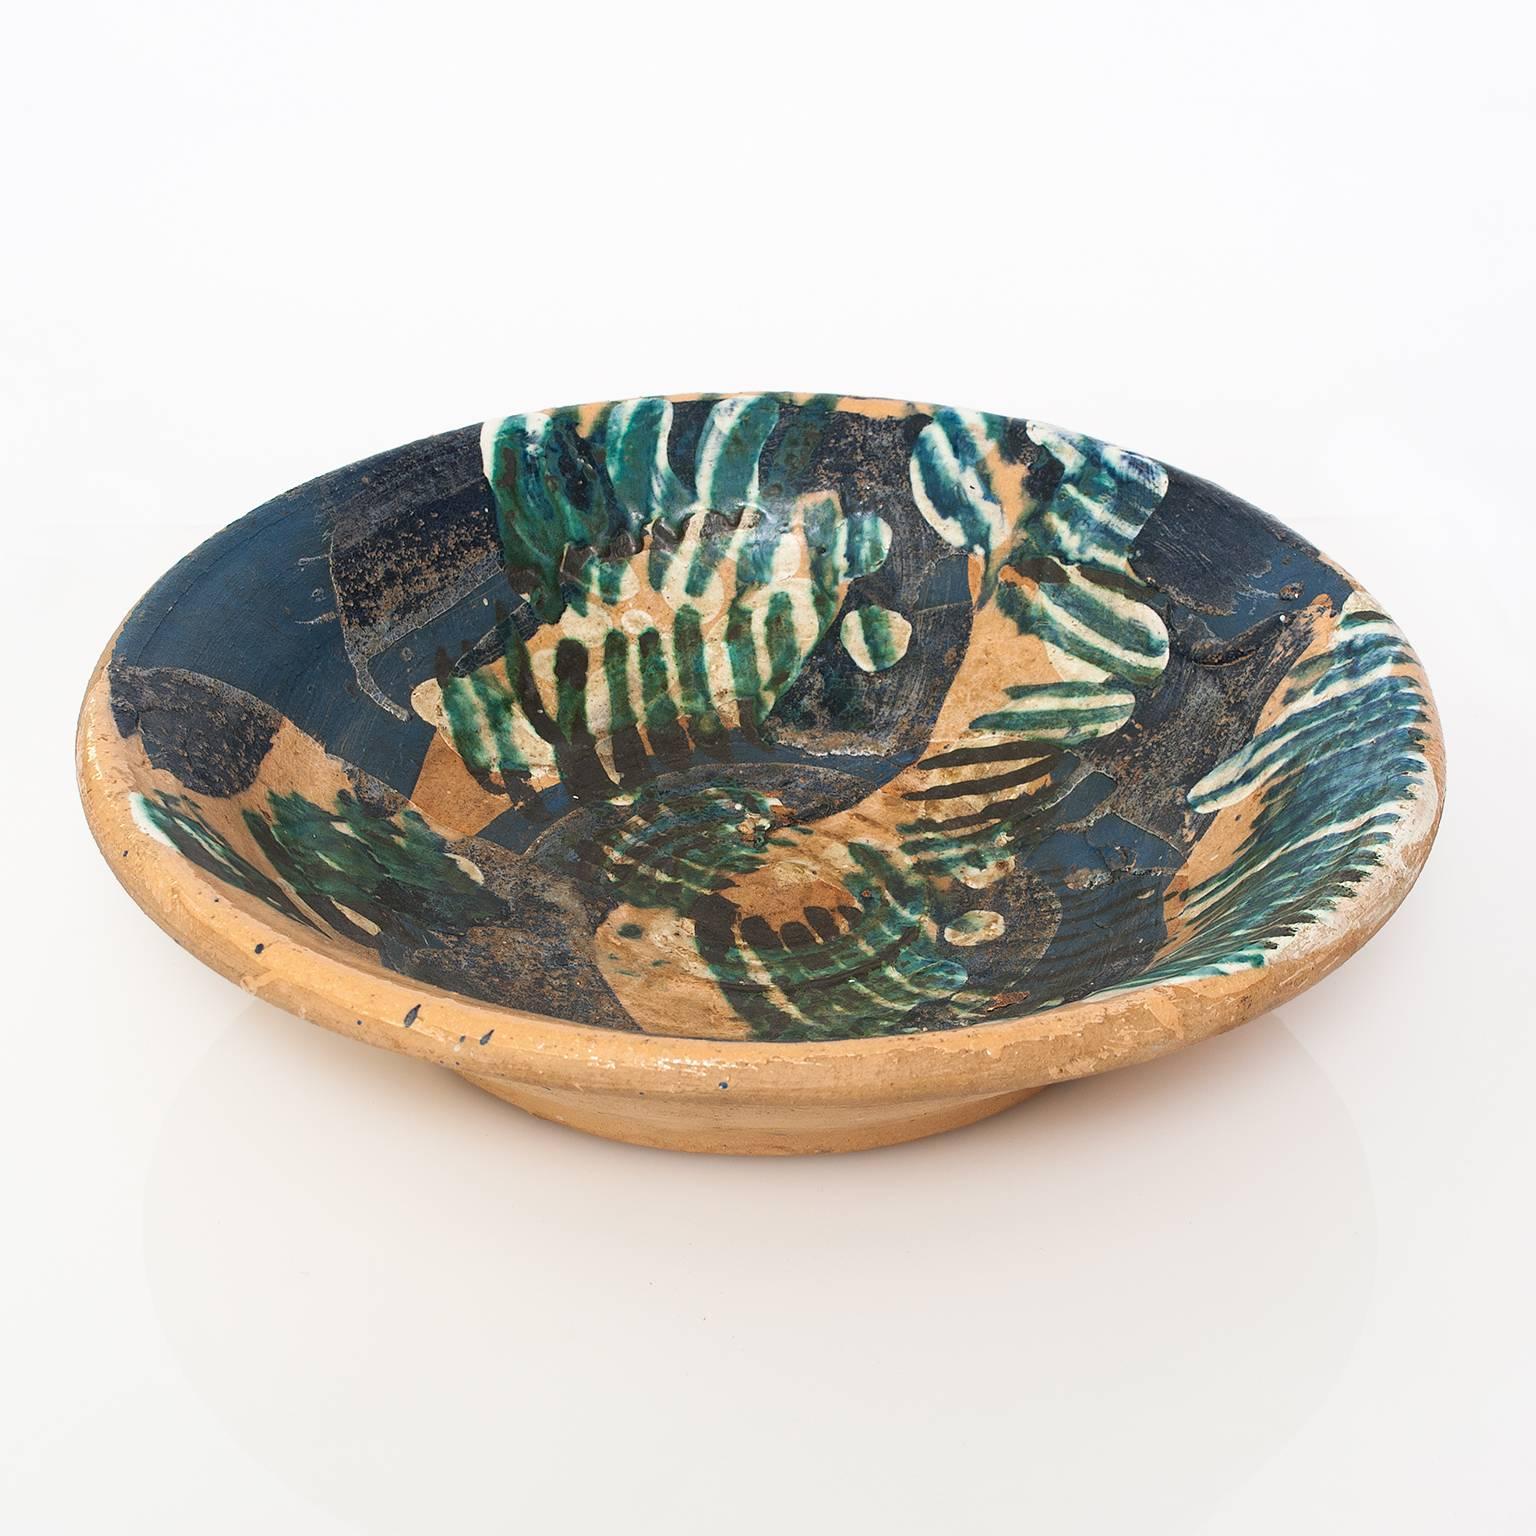 Scandinavian Modern unique hand built and decorated earthenware bowl by artist Hertha Hilton. Signed and dated on the bottom 1971. 

The Liljevalchs Museum in Stockholm, Sweden honored Hertha Hillfon (1921-2013) in the summer of 2015 with a museum